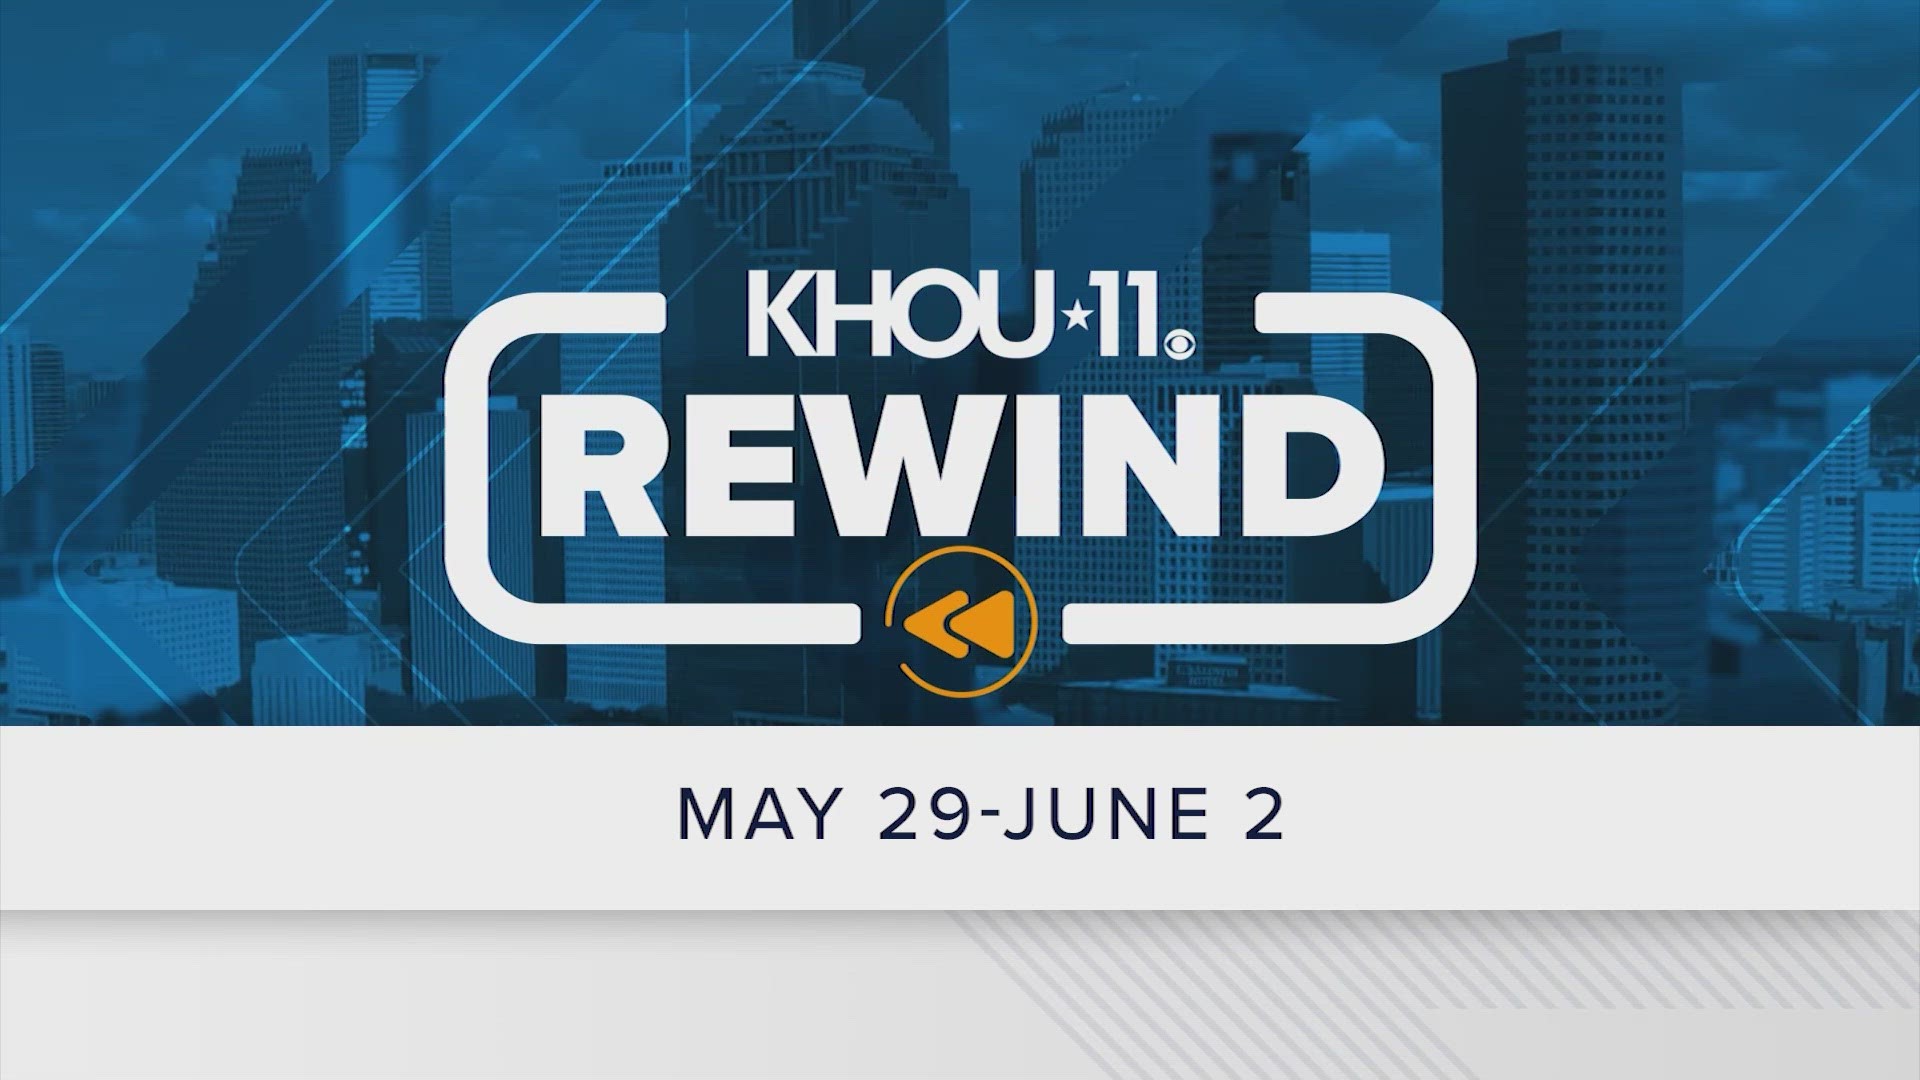 In every episode of the KHOU 11 Rewind, we get you caught up on stories you may have missed this week so you're ready for next week.